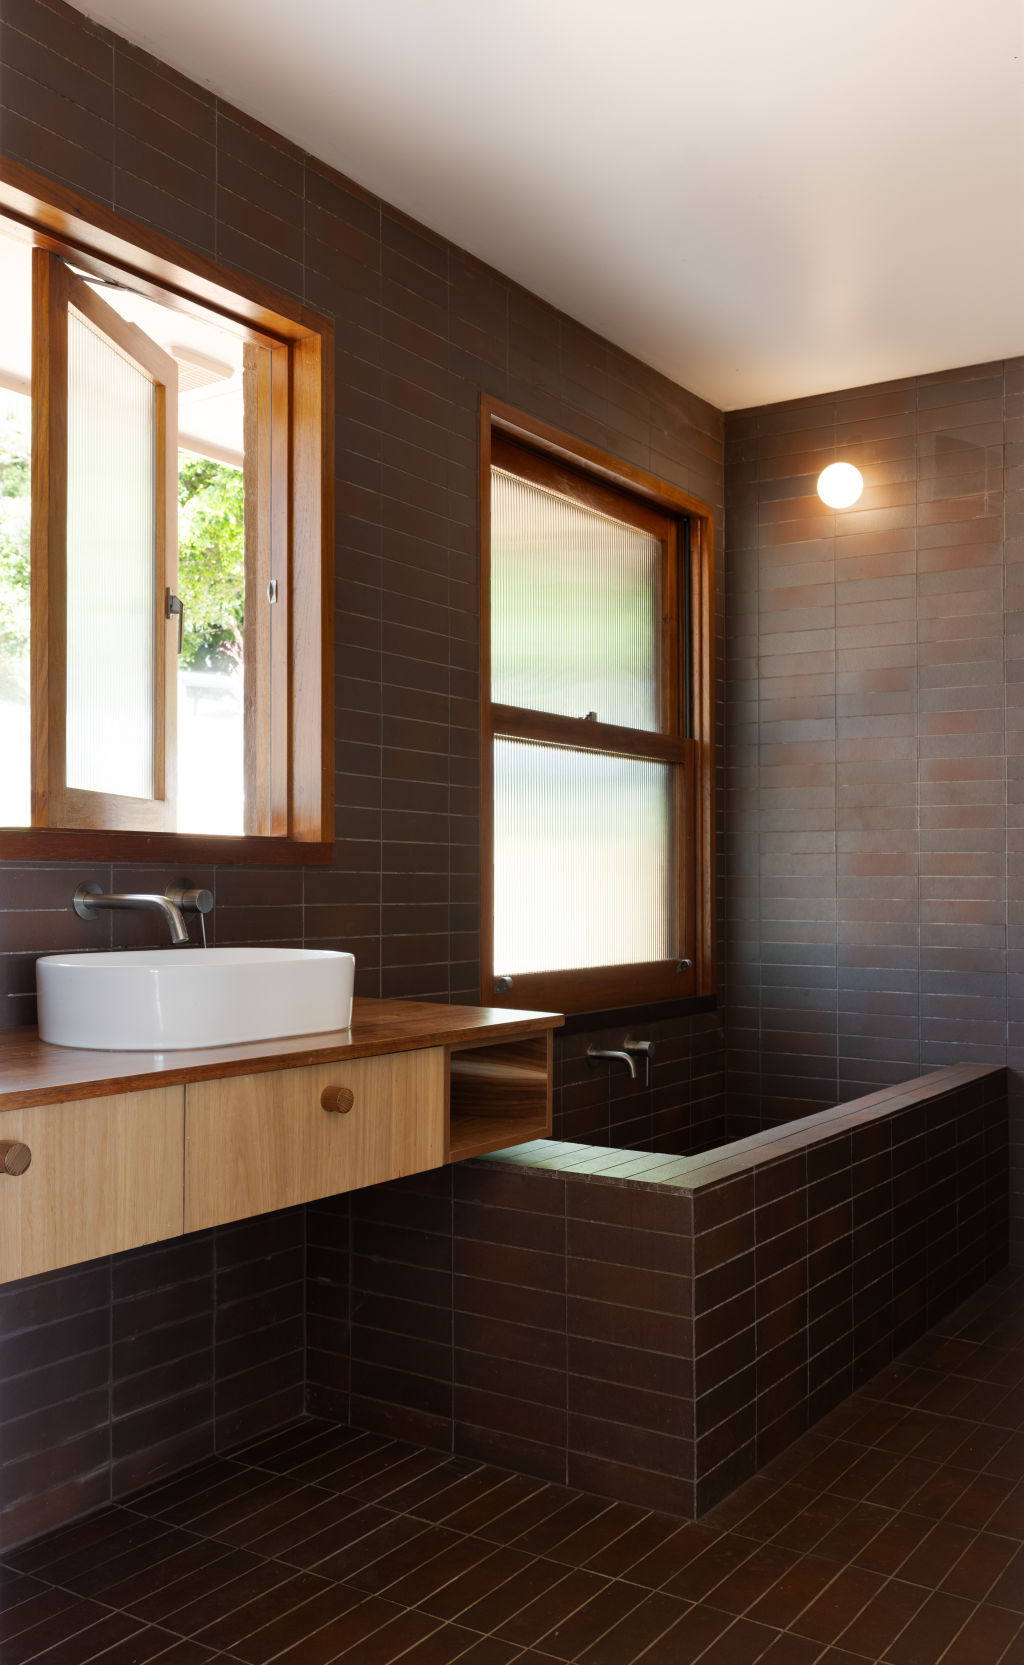 The architects drew inspiration from Taninaka's Japanese heritage, with timber throughout and Japanese tiles adding a spa-like feel in the bathrooms. Photo: Louise Roche